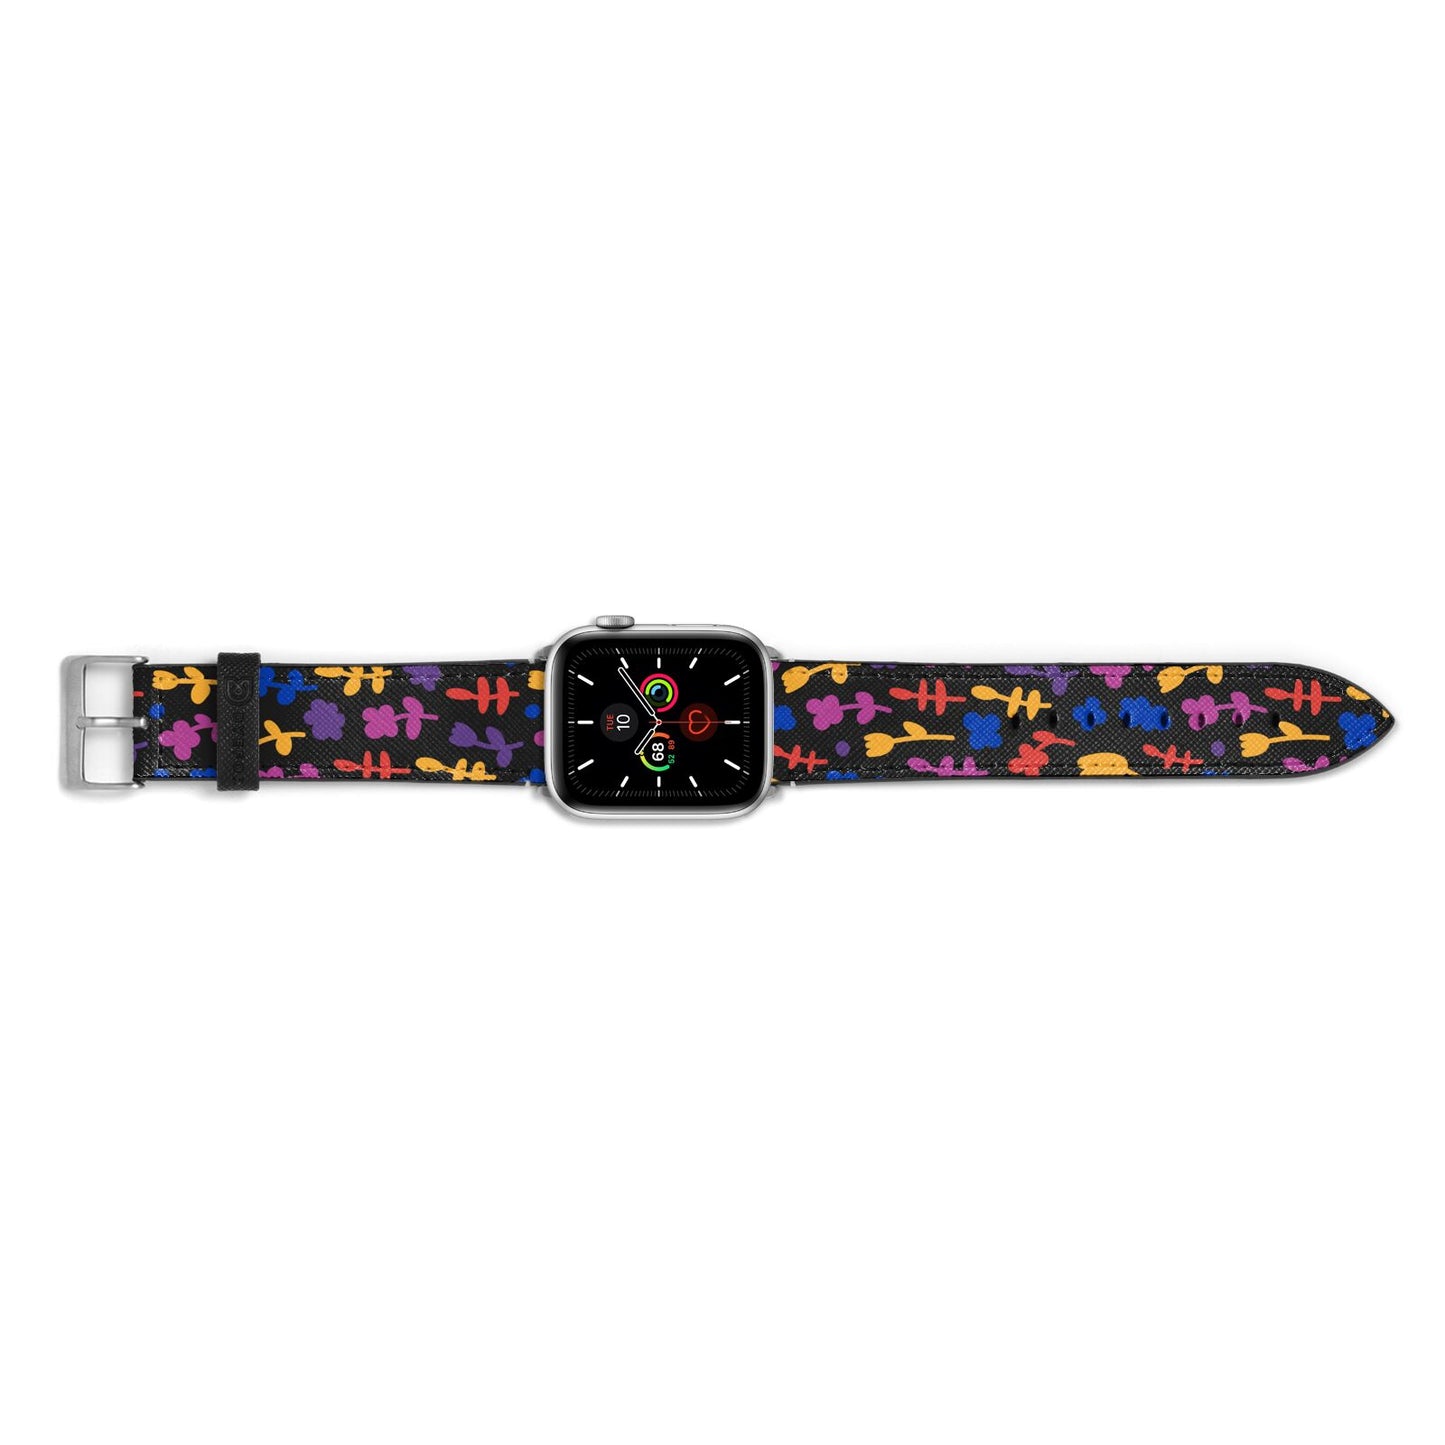 Abstract Floral Apple Watch Strap Landscape Image Silver Hardware